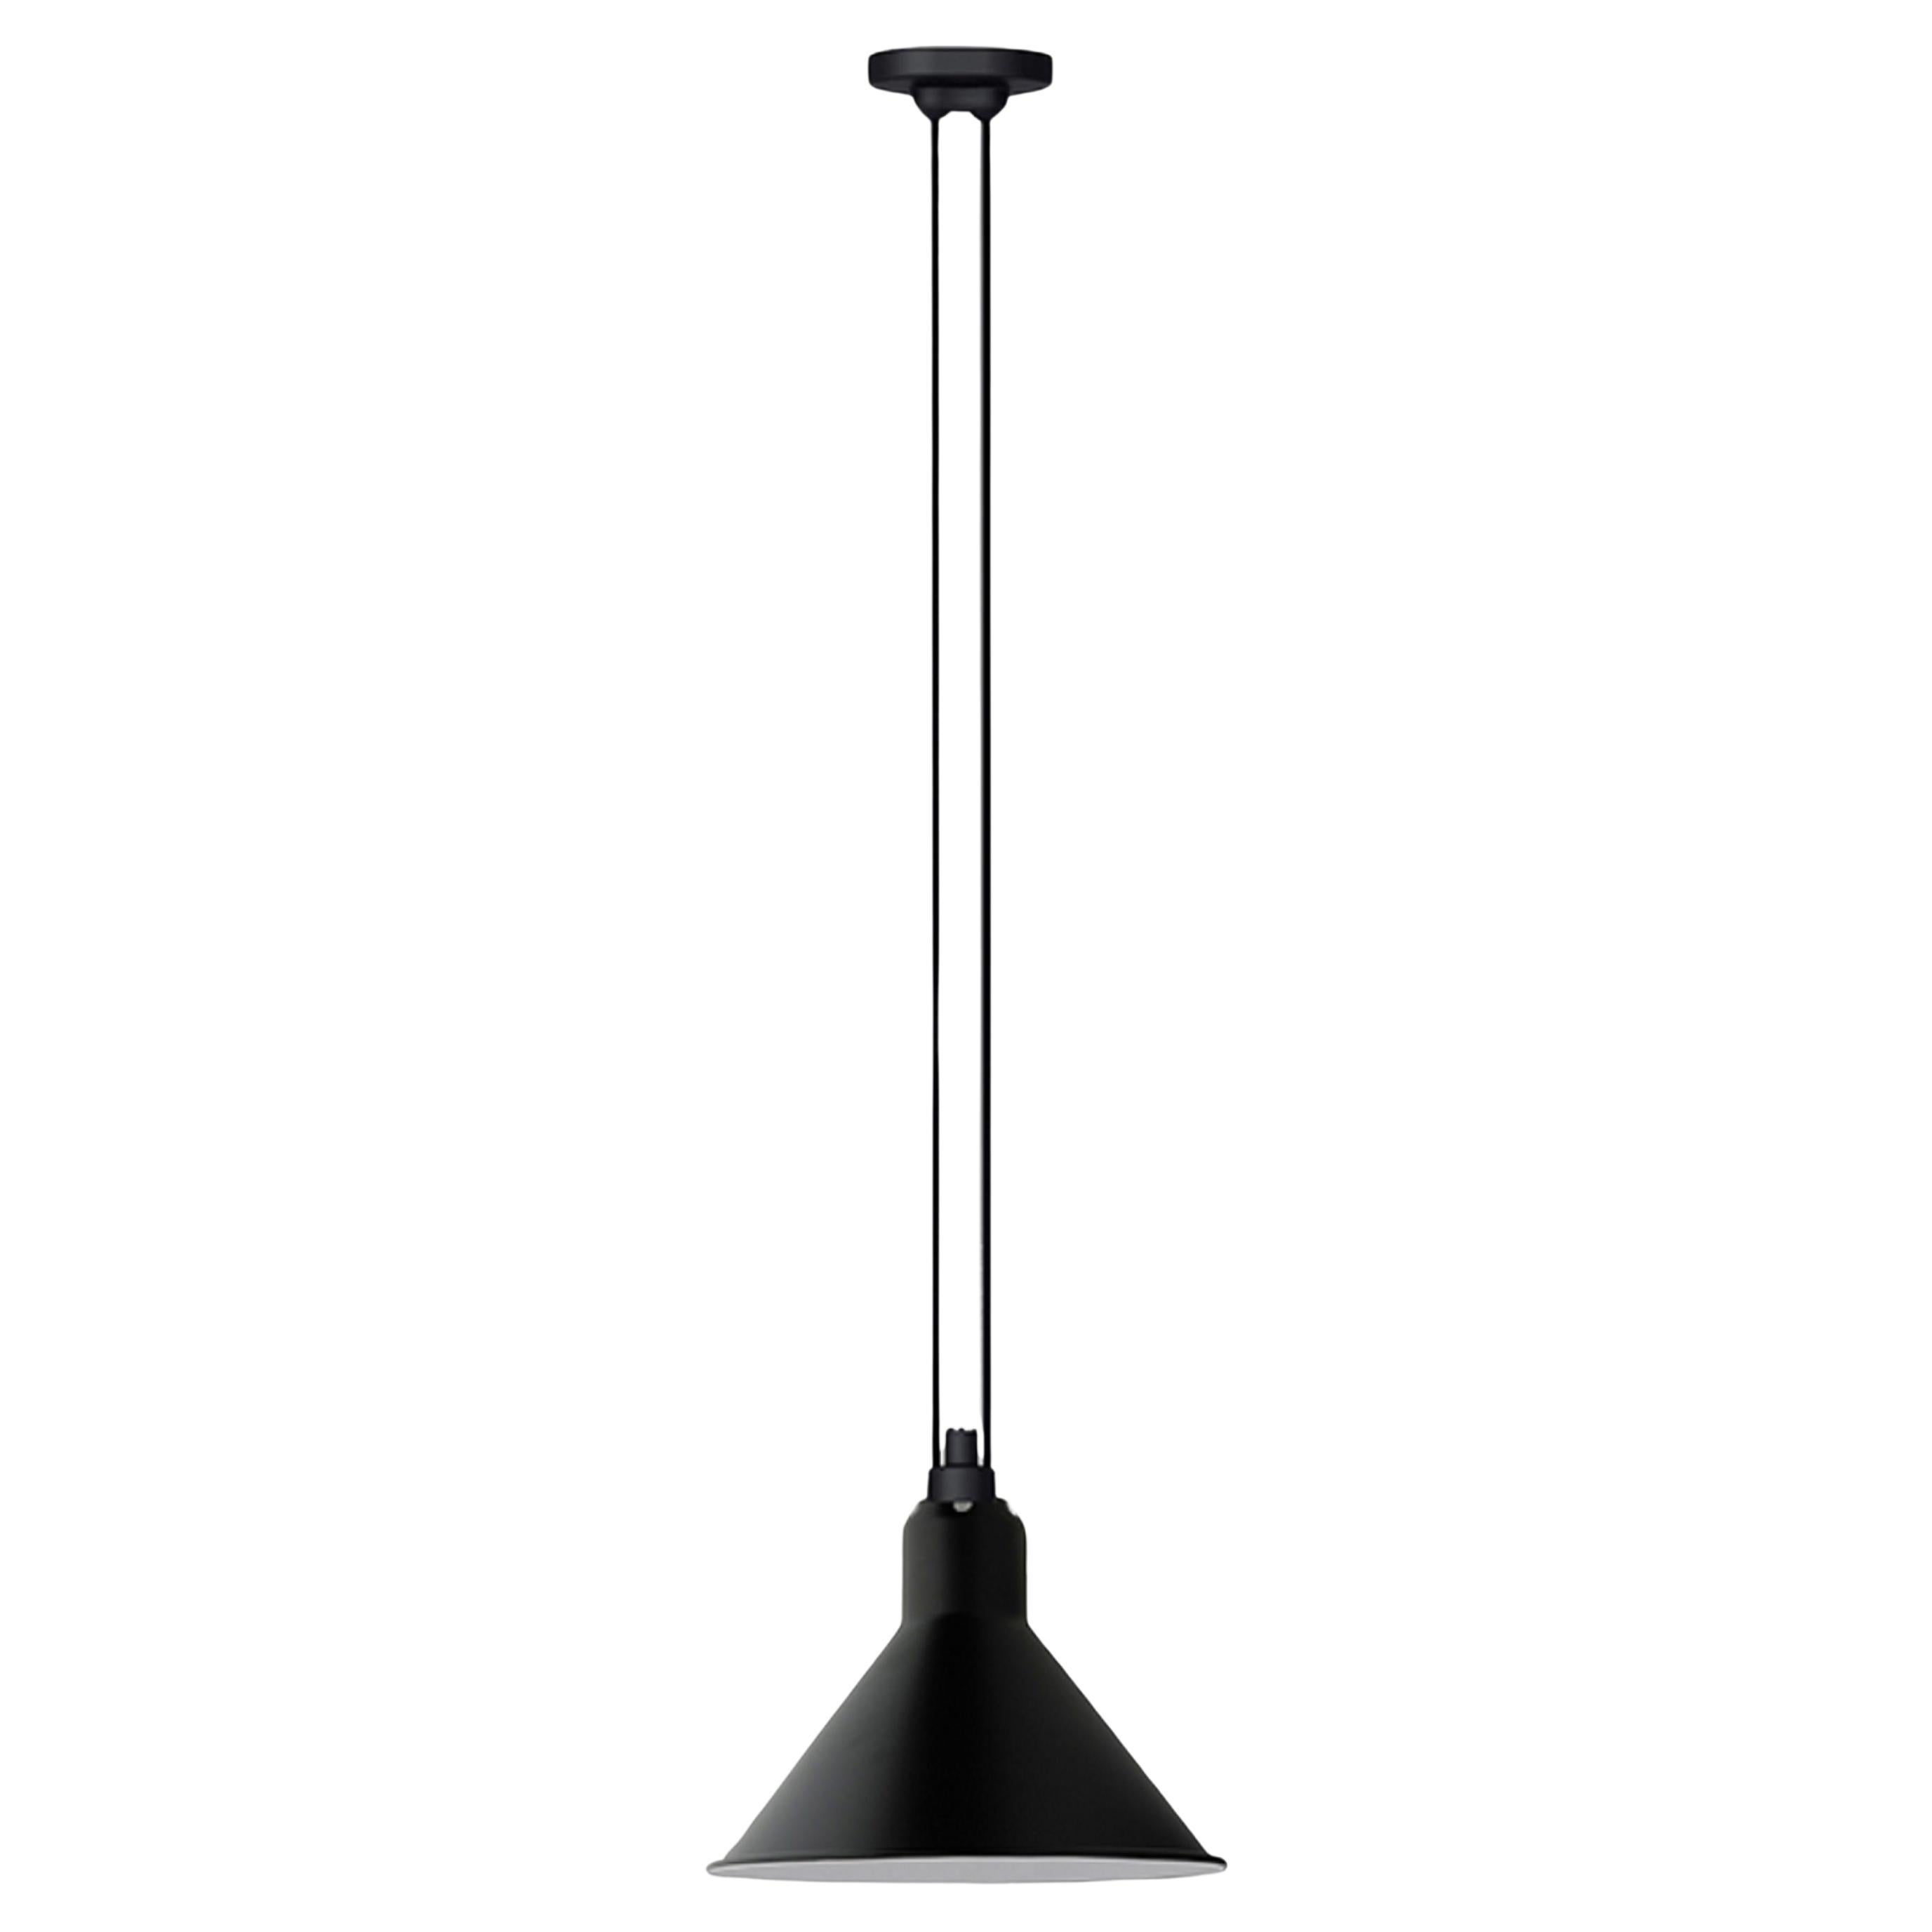 DCW Editions Les Acrobates N°322 Large Conic Pendant Lamp in Black Shade For Sale